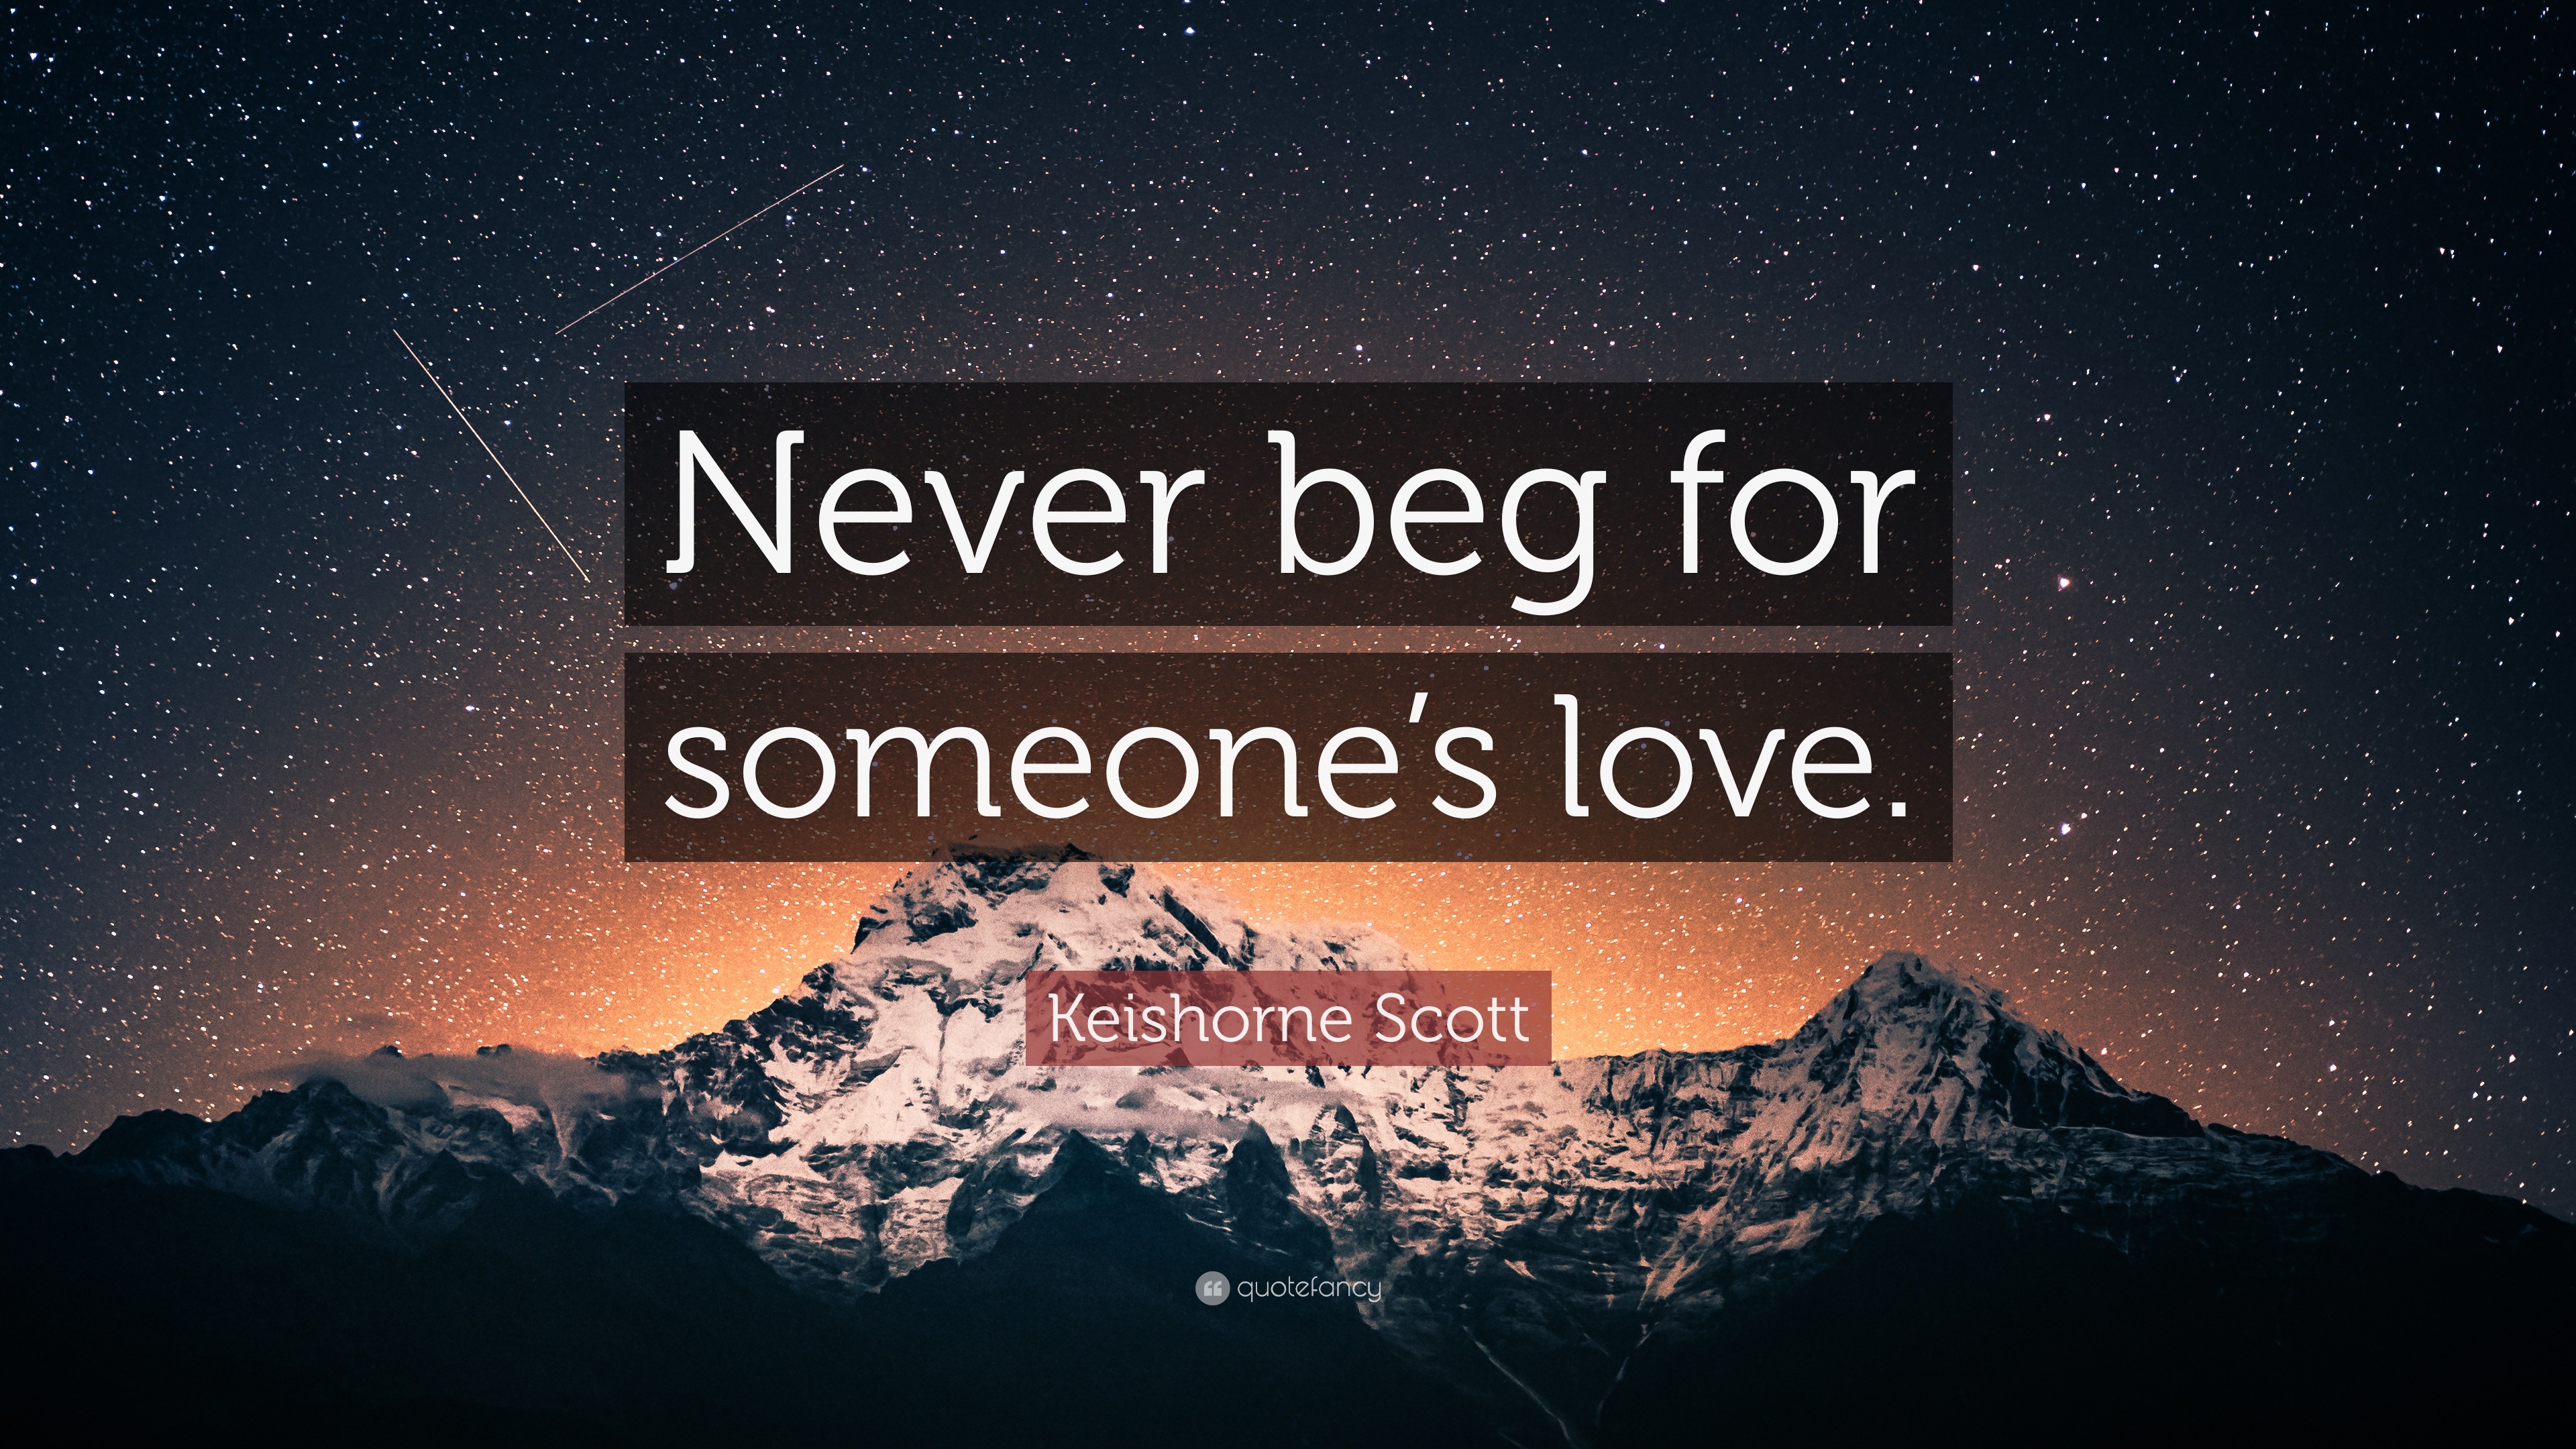 Keishorne Scott Quote: “Never beg for someone’s love.”